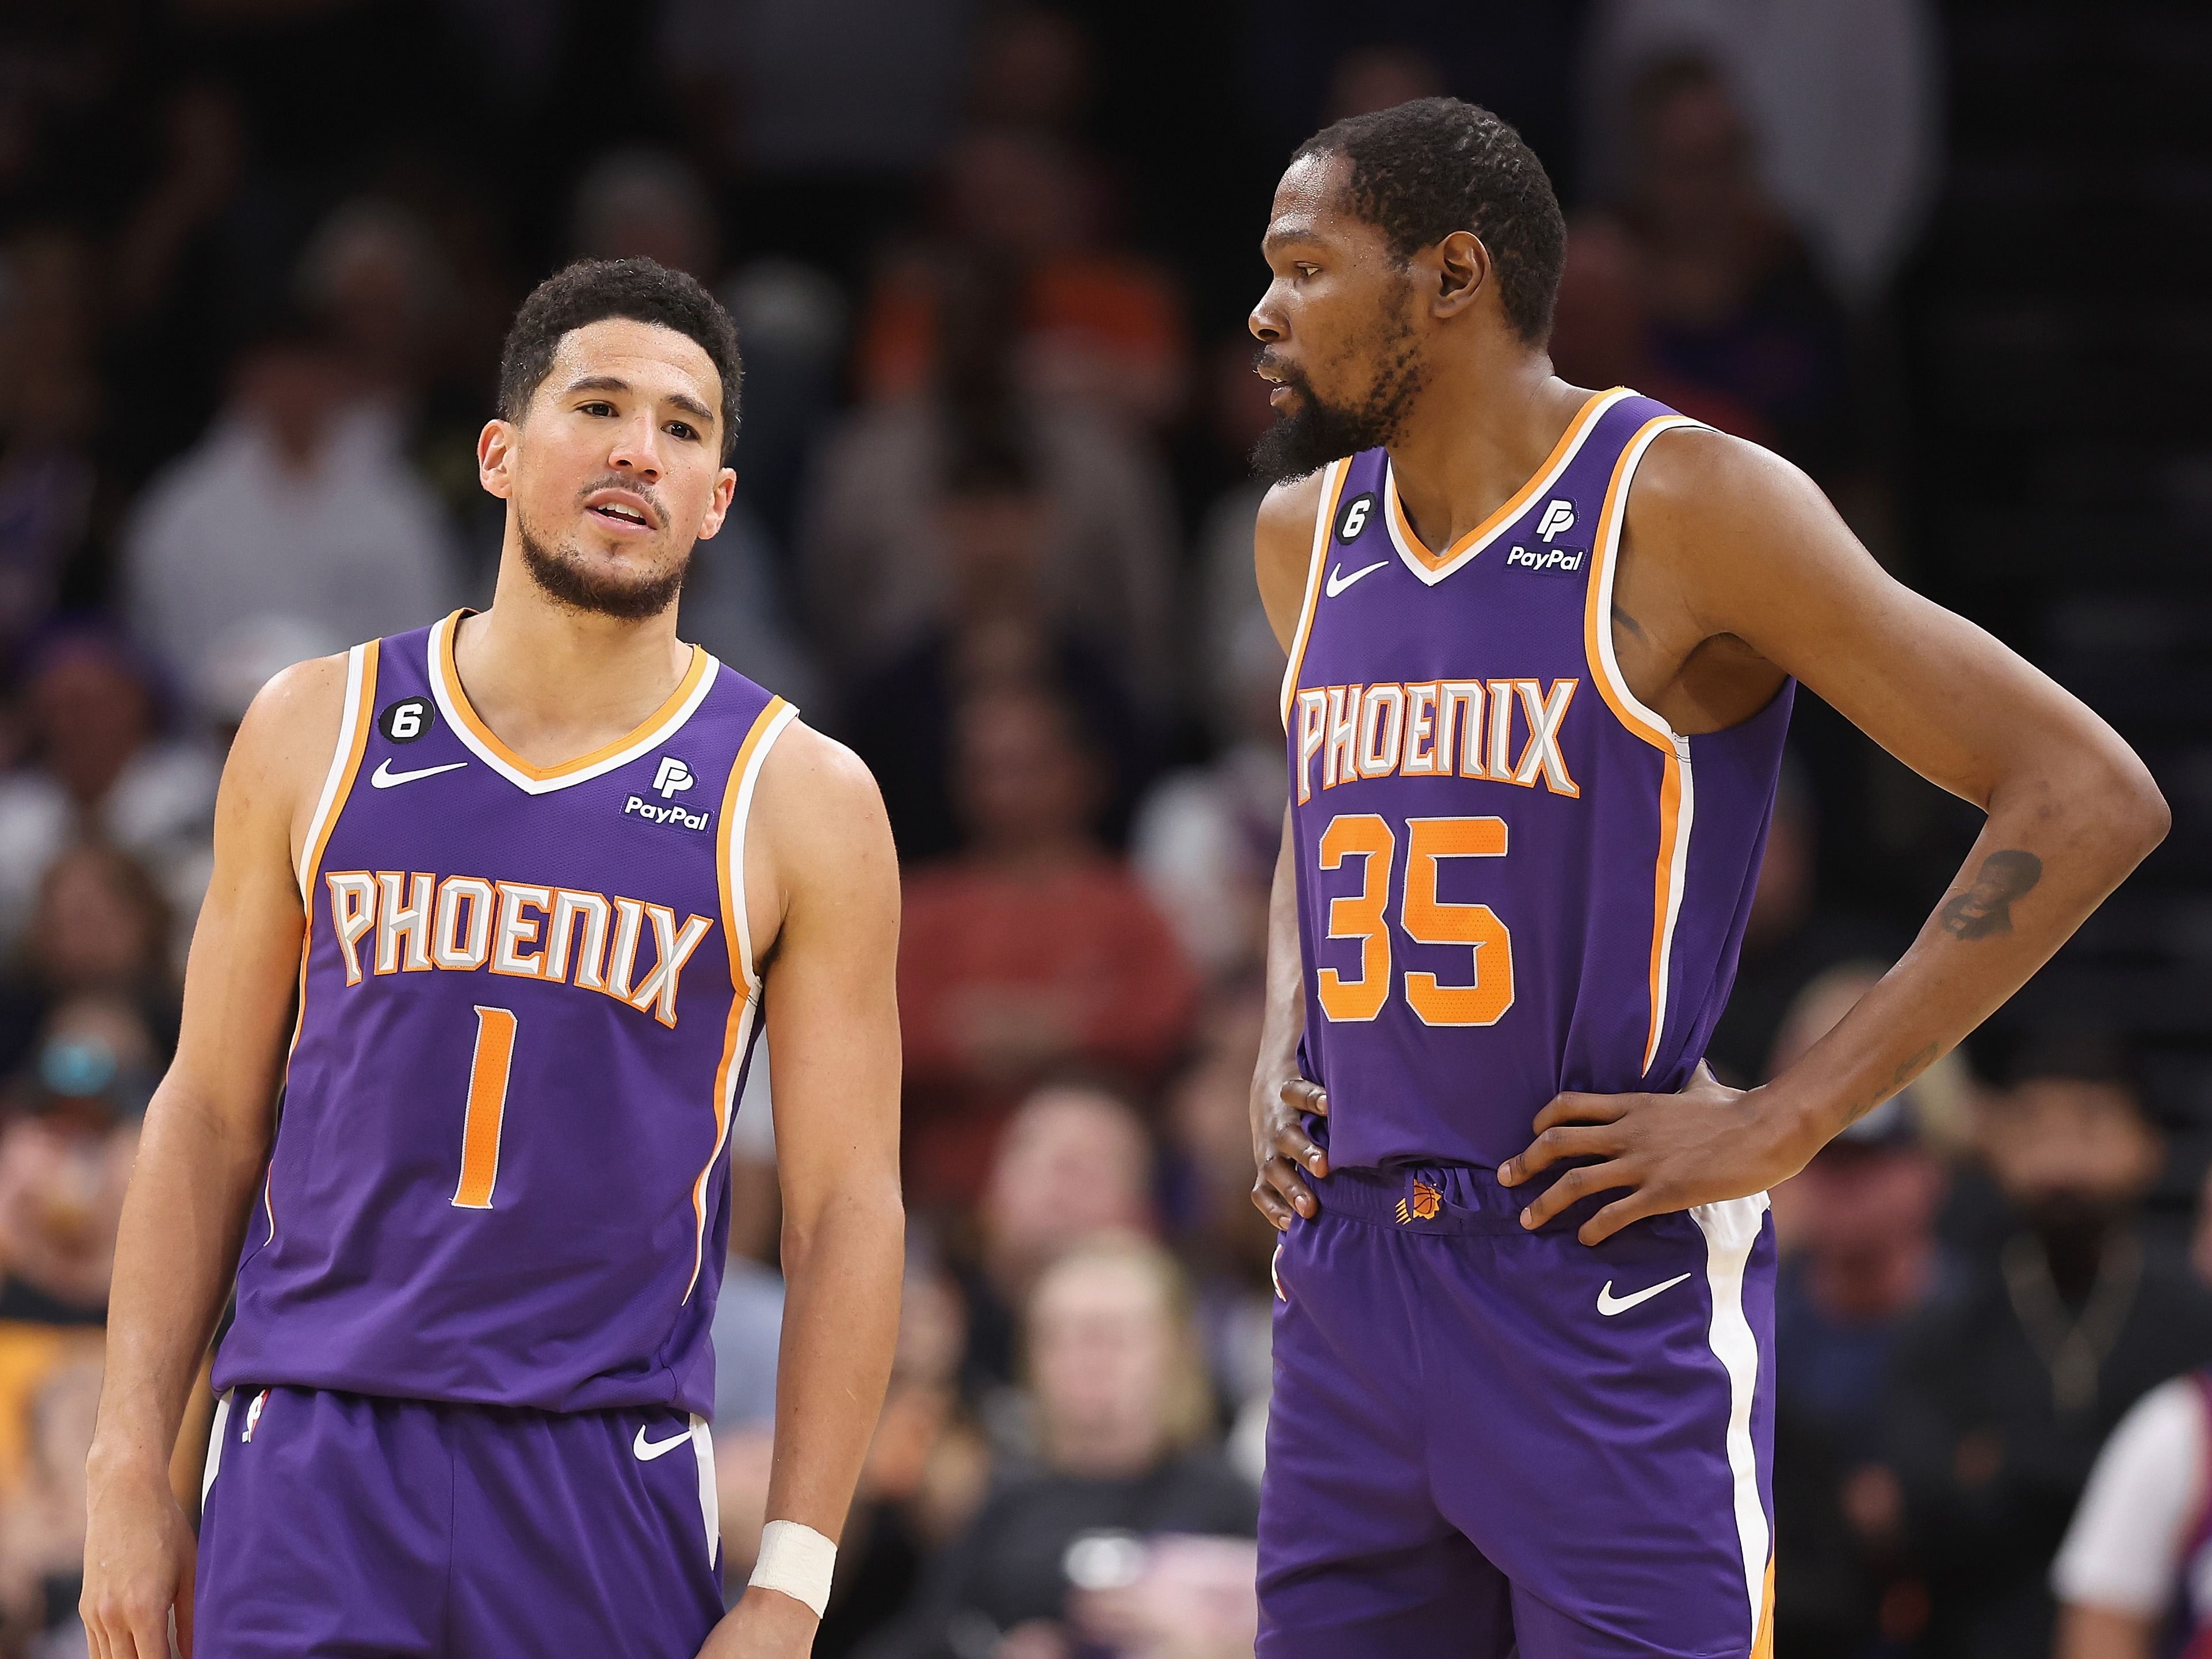 Devin Booker and Kevin Durant of the Phoenix Suns